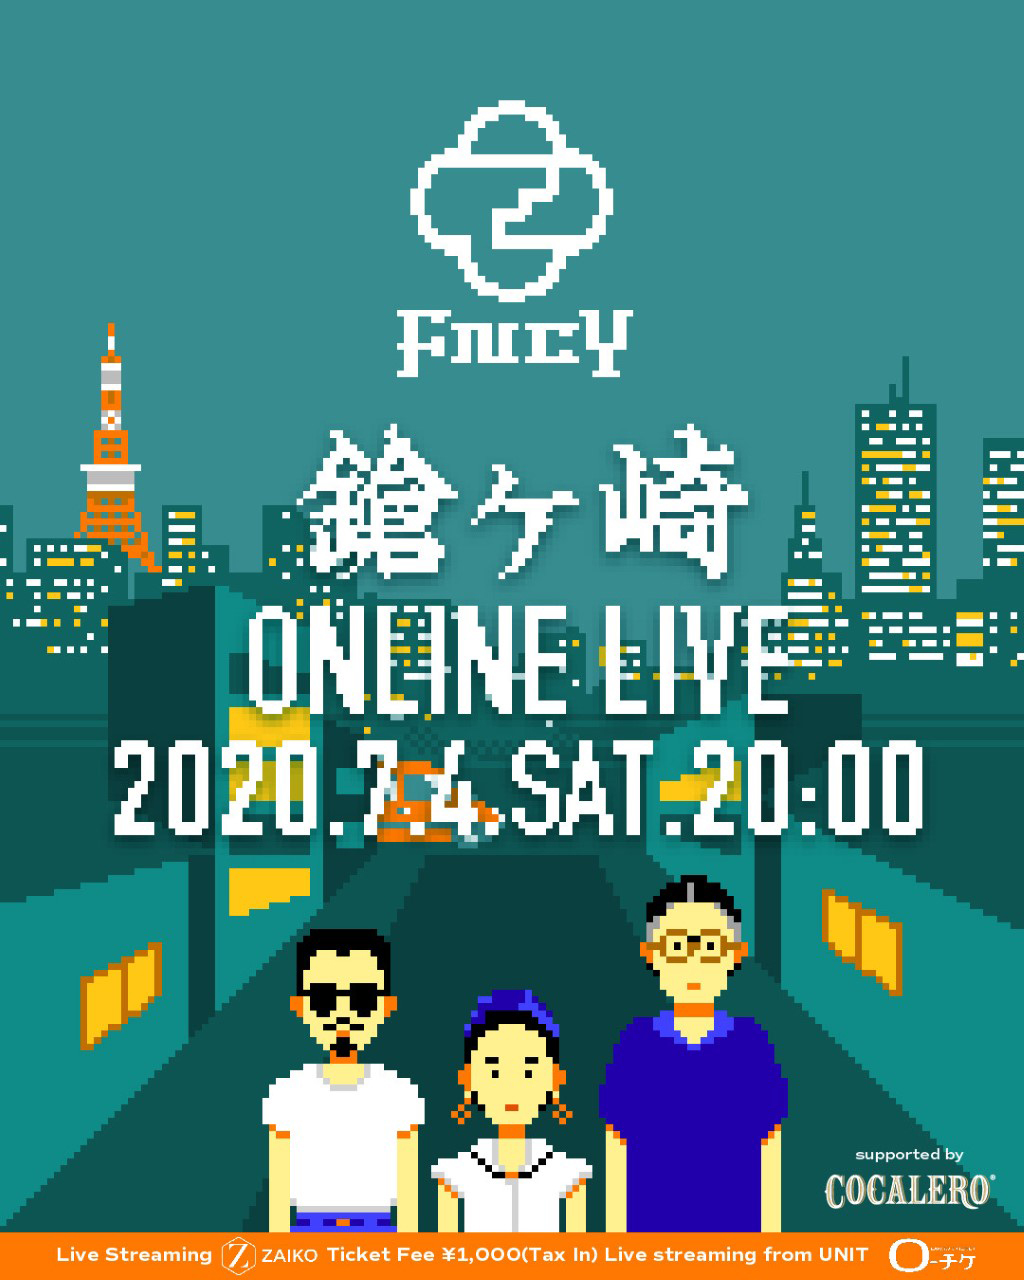 FNCY 槍ヶ崎 ONLINE LIVE supported by COCALERO